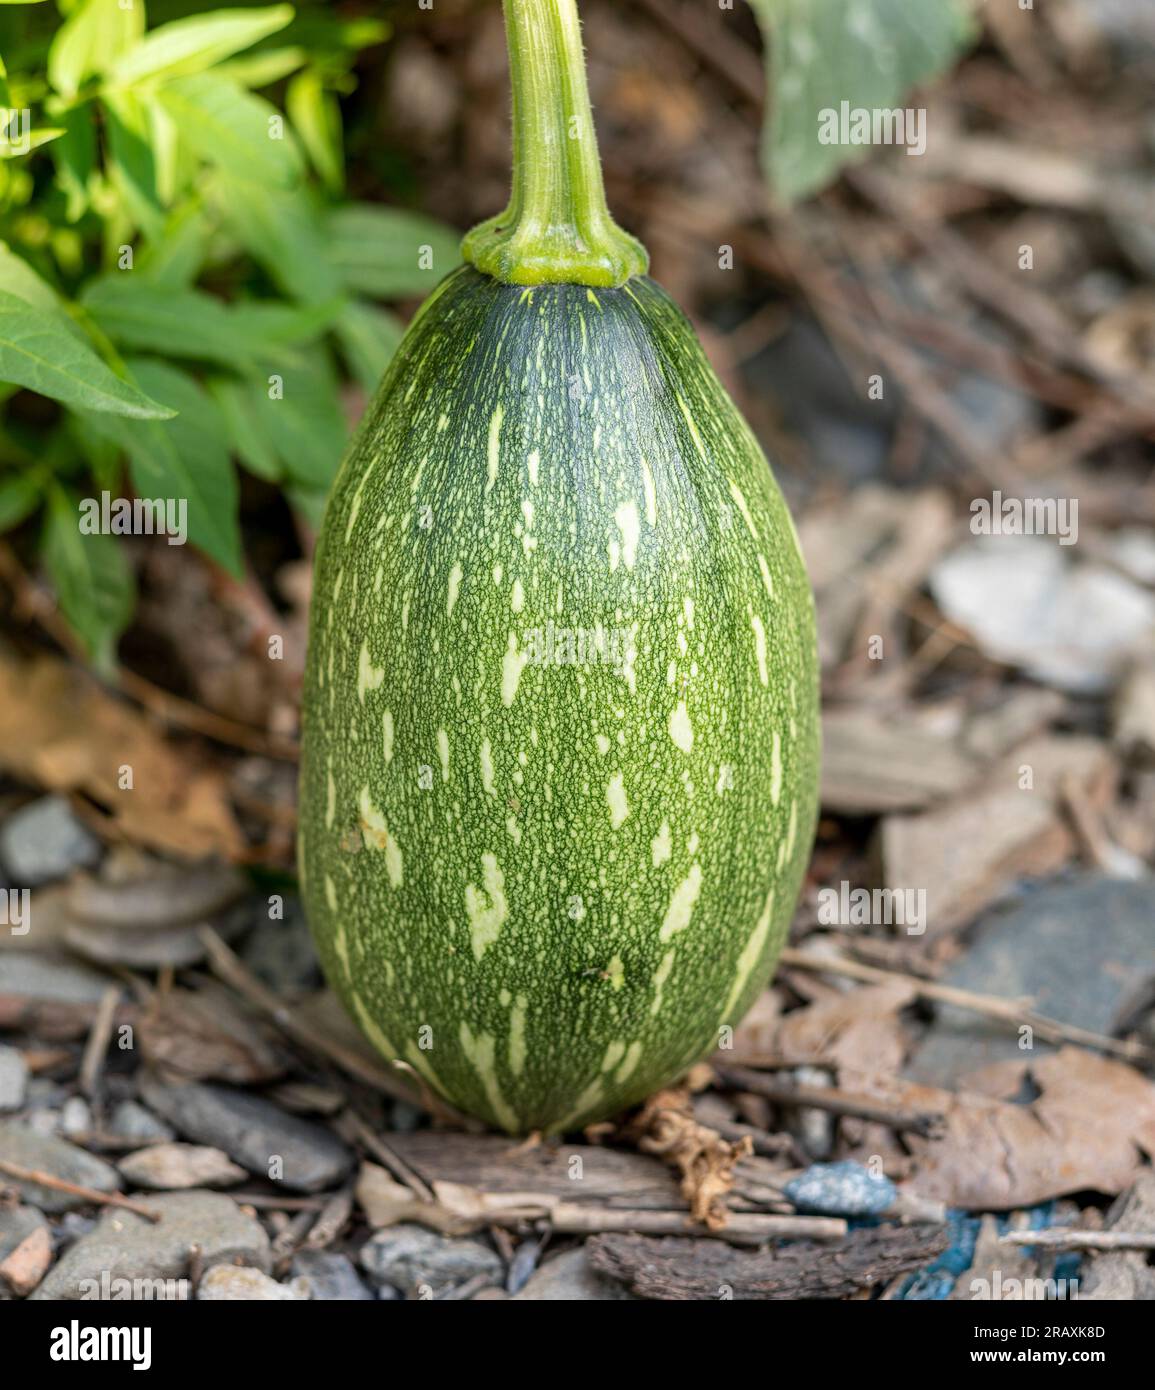 Small green pumpkin growing on a pumpkin plant in the garden. Selective focus with blurred background. Stock Photo